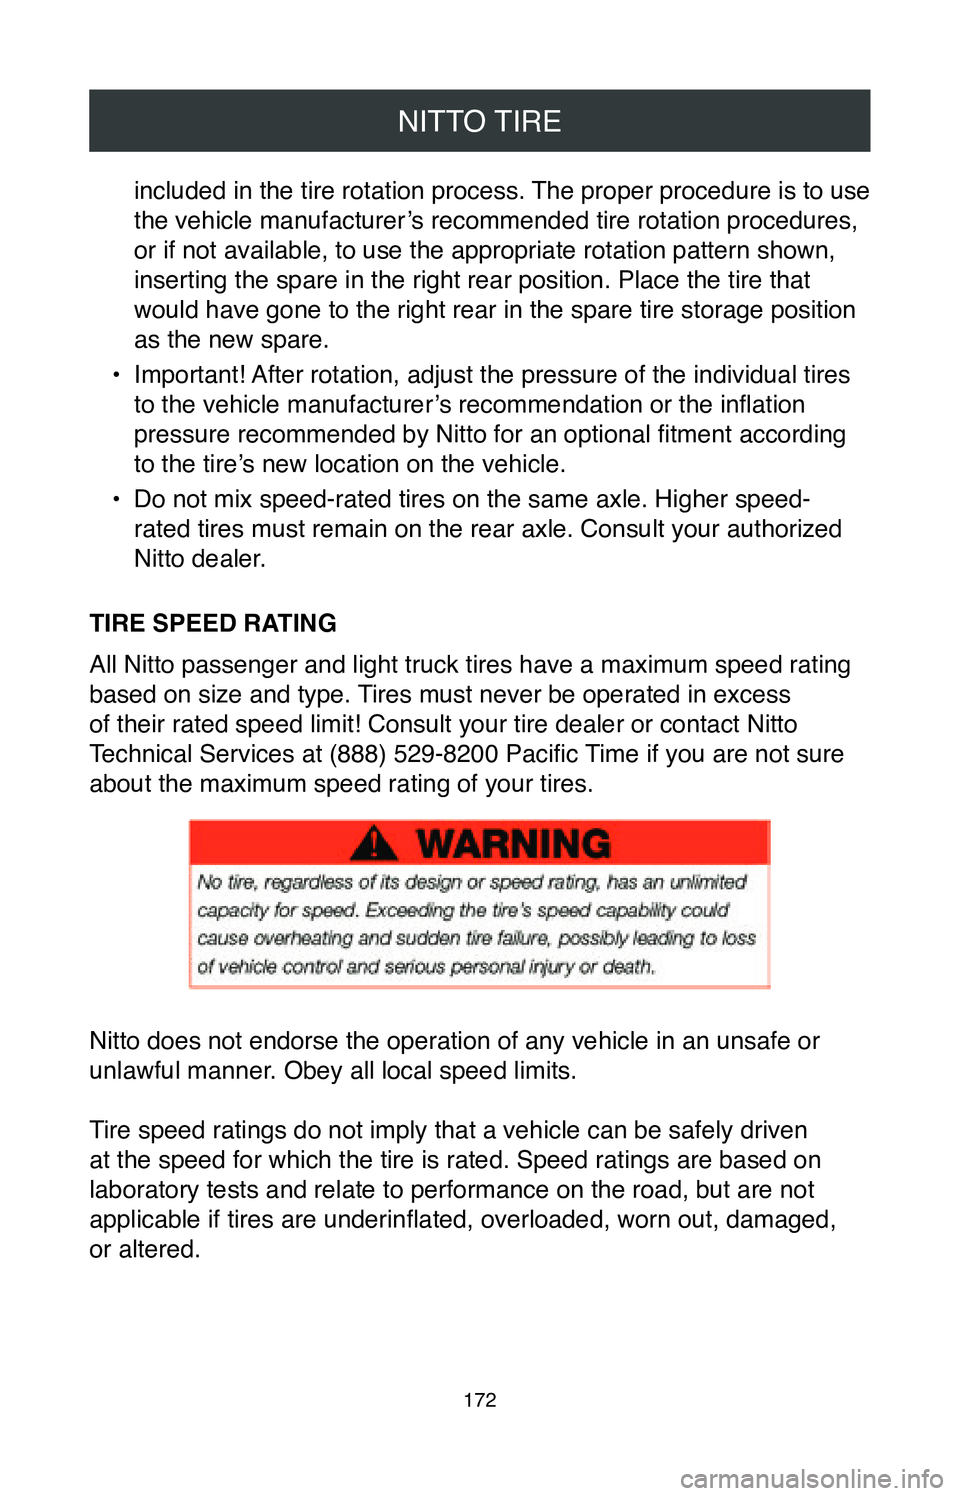 TOYOTA CAMRY HYBRID 2020  Warranties & Maintenance Guides (in English) NITTO TIRE
172
included in the tire rotation process. The proper procedure is to use 
the vehicle manufacturer’s recommended tire rotation procedures, 
or if not available, to use the appropriate ro